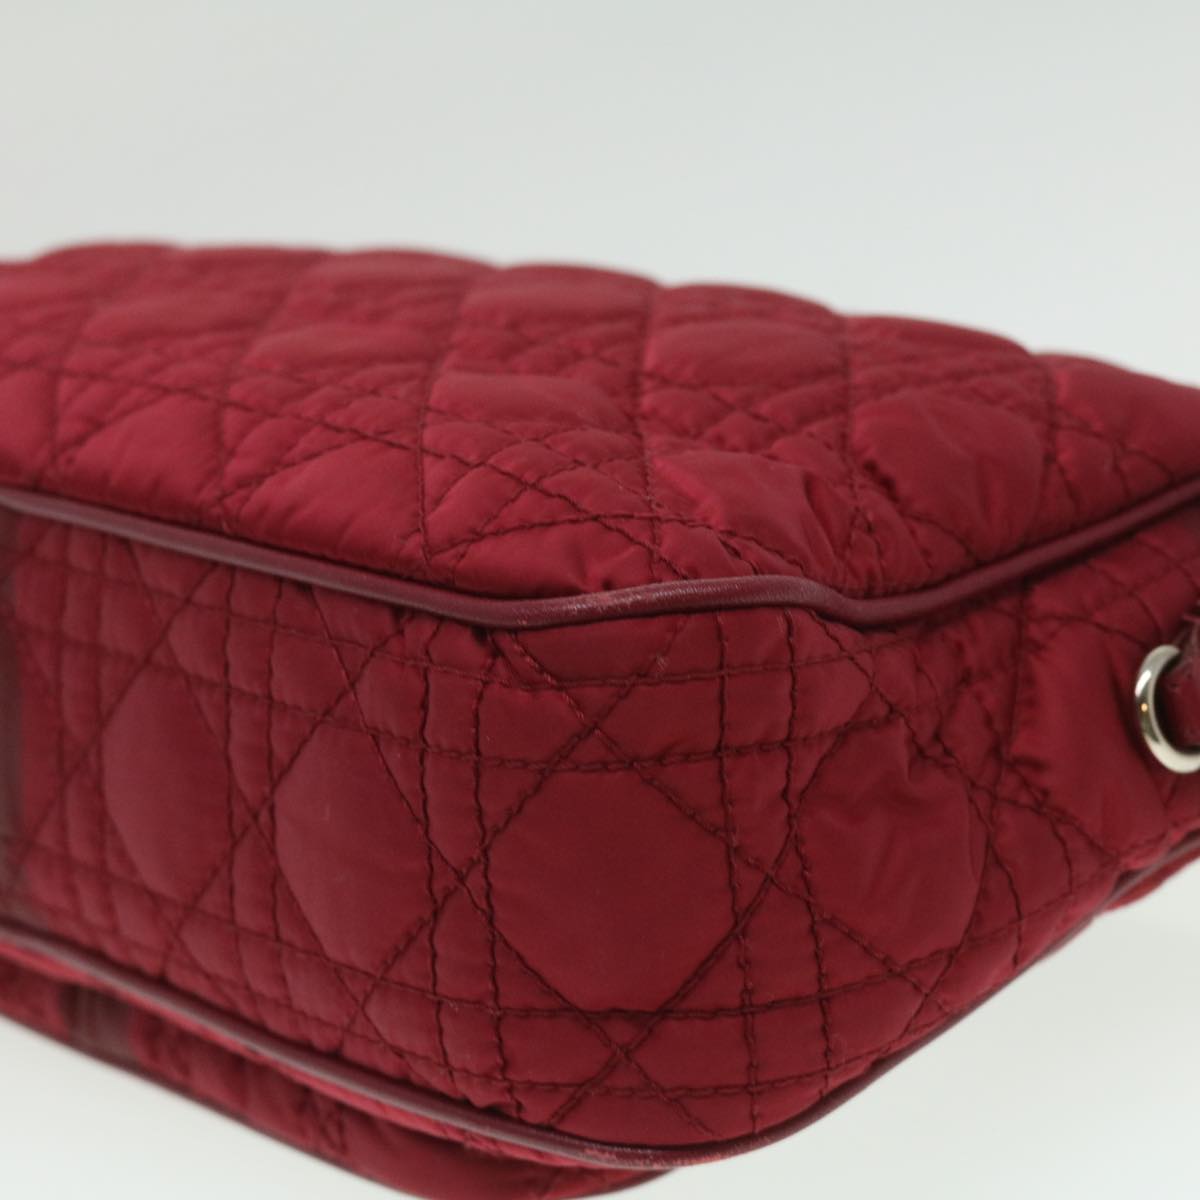 Christian Dior Lady Dior Canage Shoulder Bag Nylon outlet Red Auth bs3570